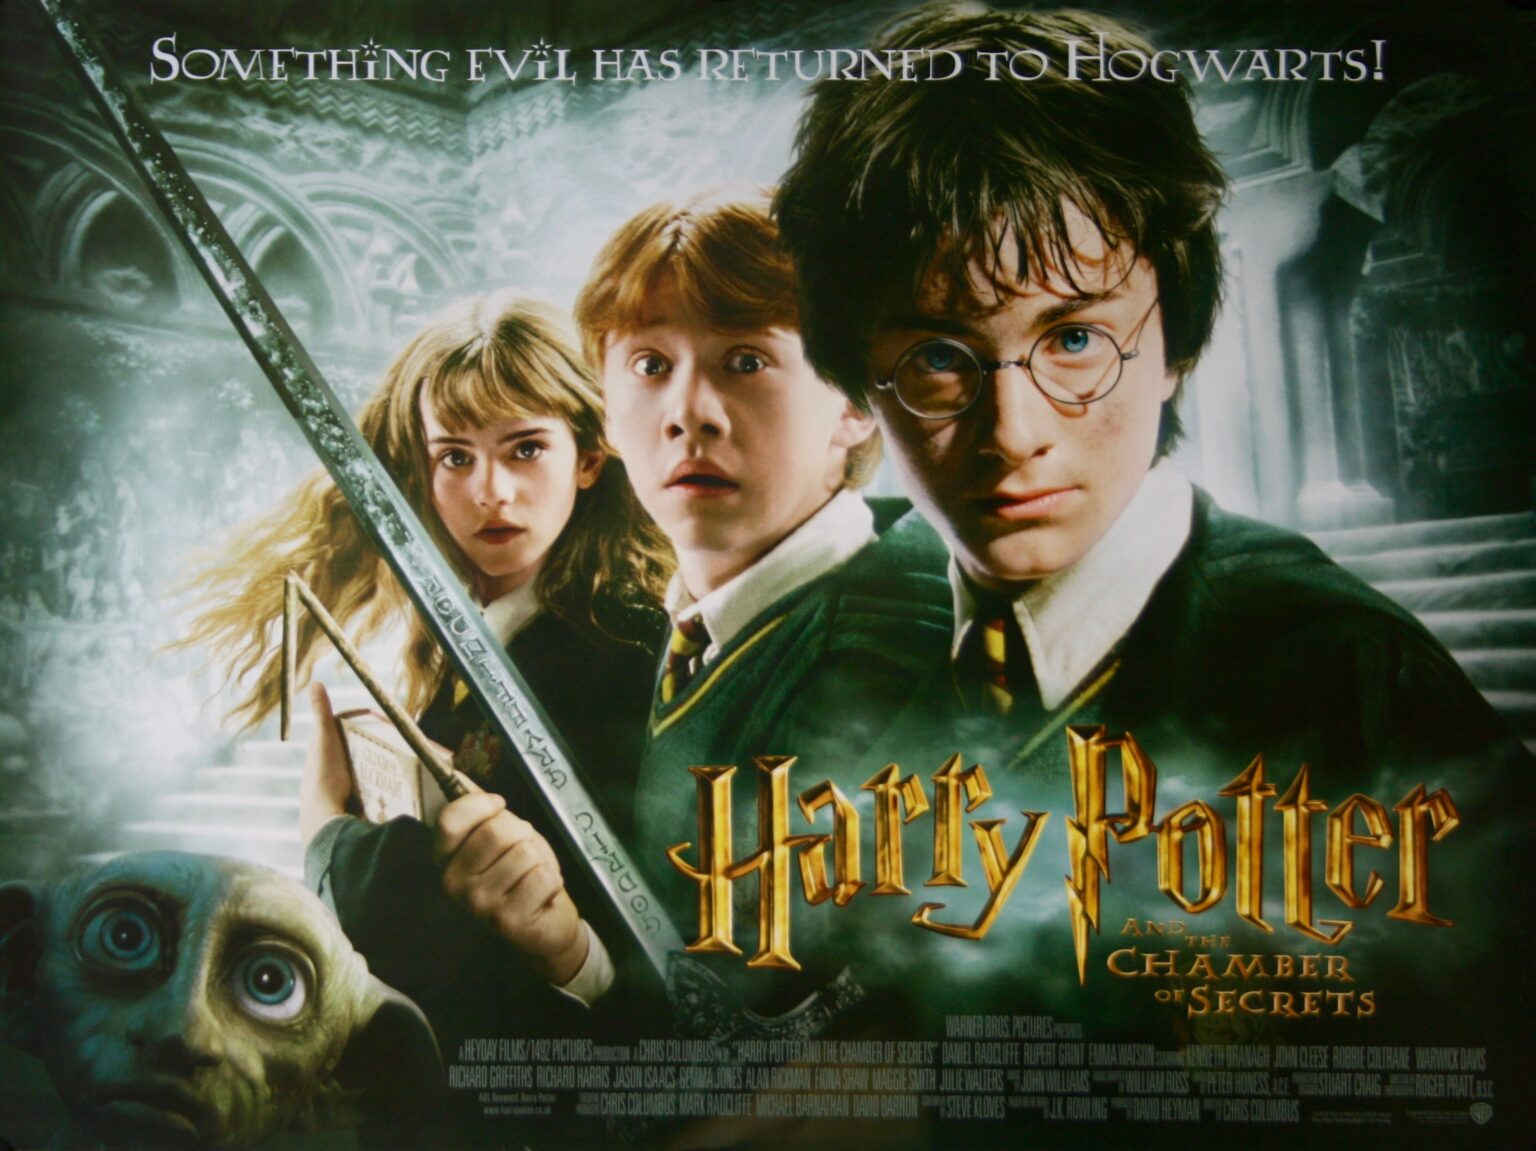 Exploring Streaming Options for Harry Potter: Where Can You Watch the Wizarding World?